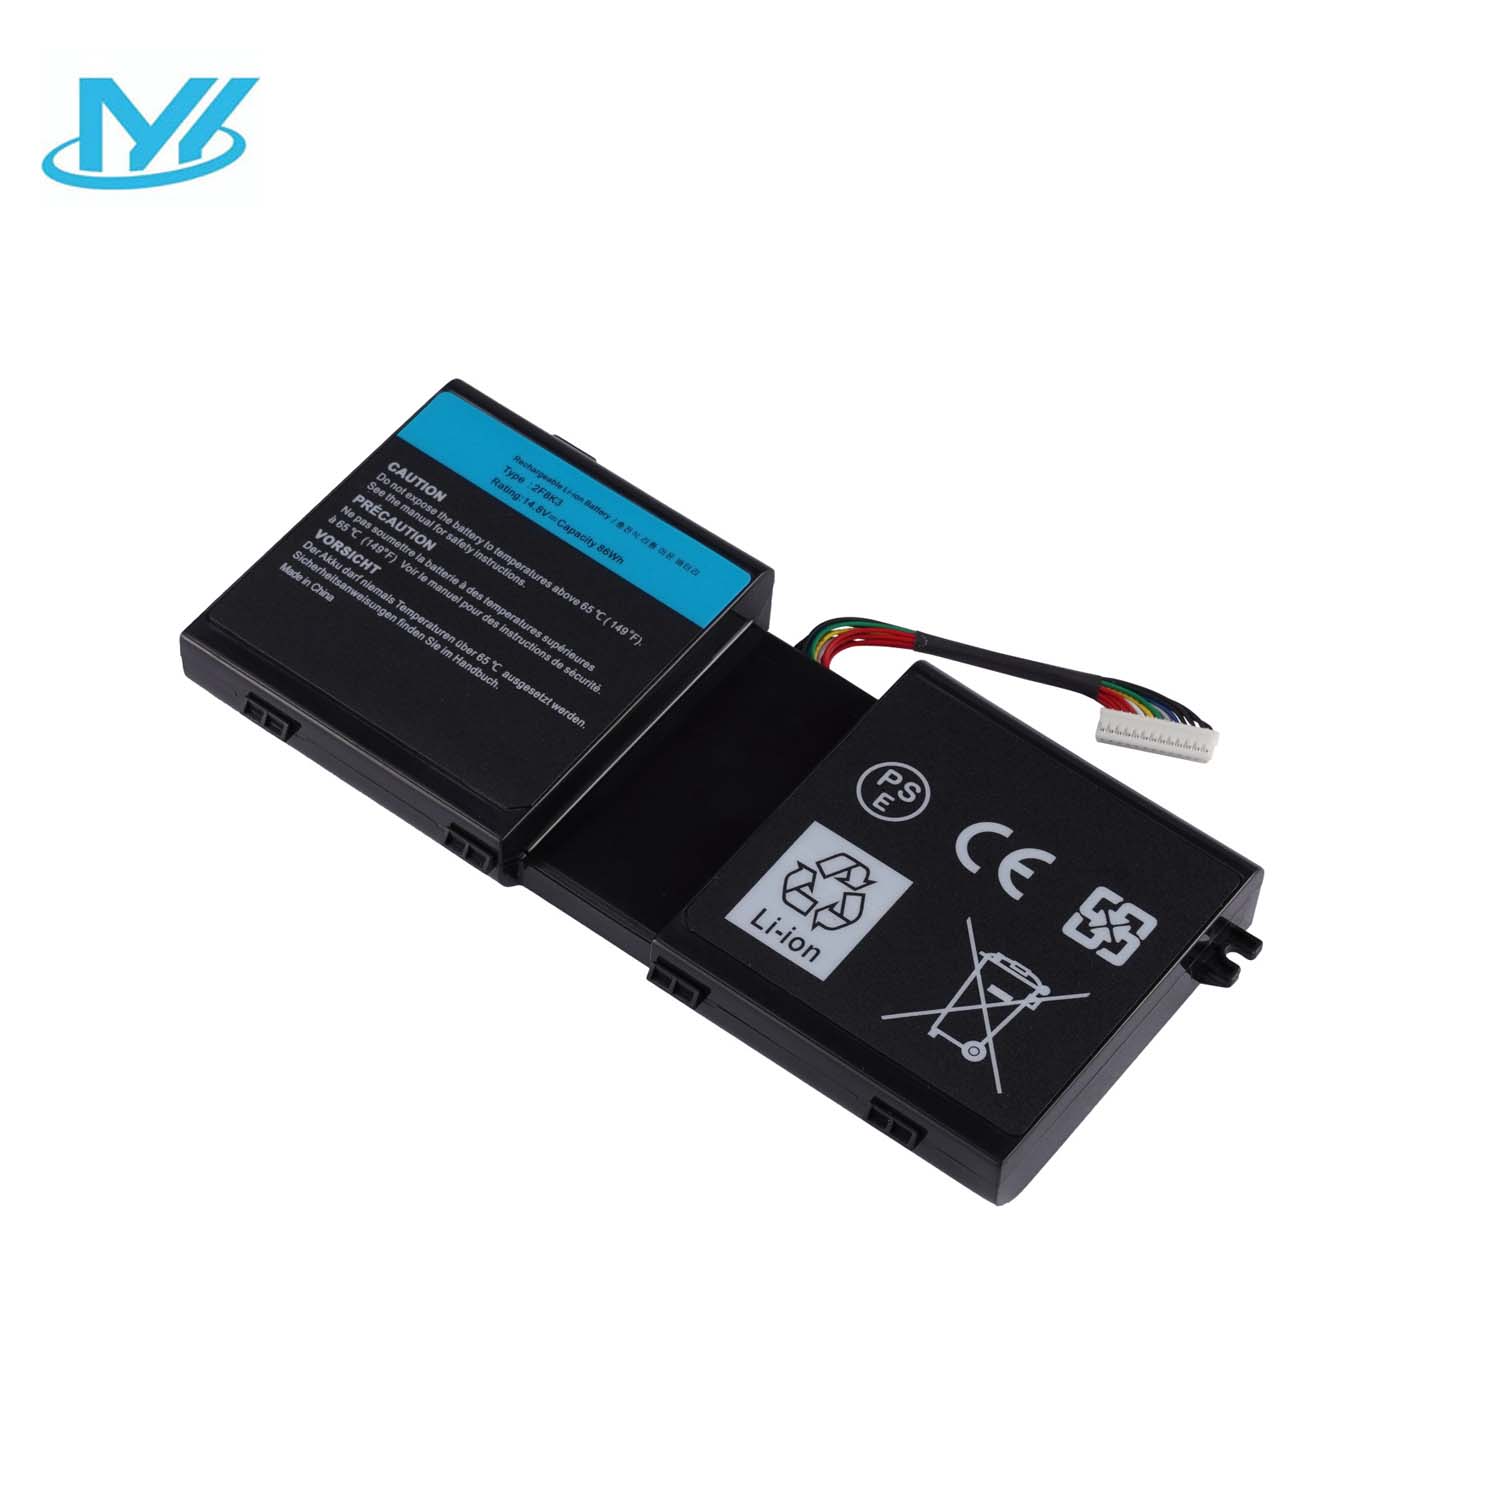 2F8K3 Notebook Battery Replacement Laptop Battery for Dell Alienware 17 R1 17X M17X-R5 Alienware 18 R1 18X M18X-R3 Series